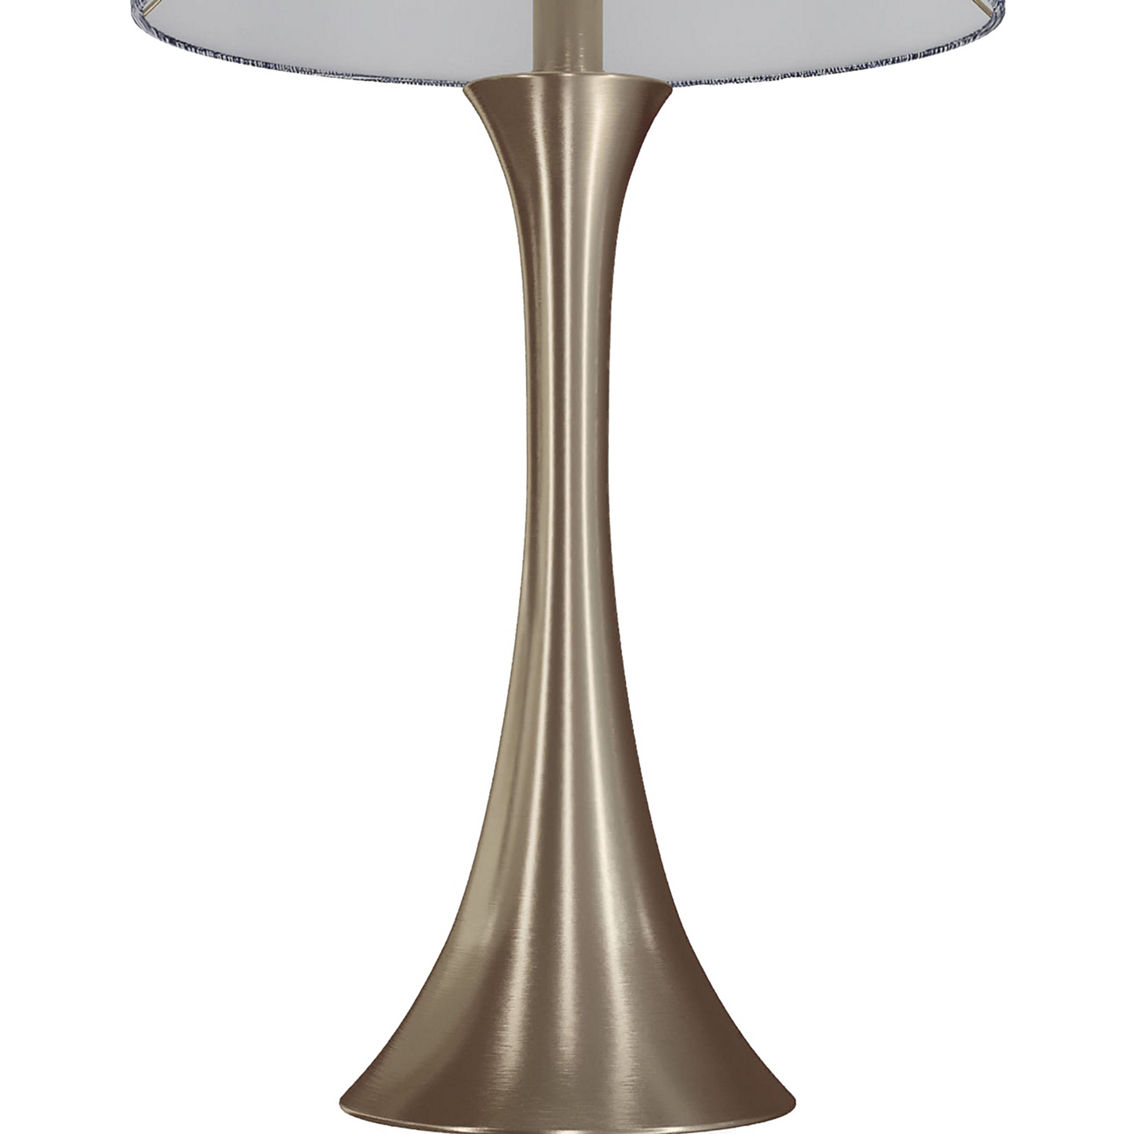 LumiSource Lenuxe 24.25 in. Metal Table Lamps 2 pk. - Image 7 of 9